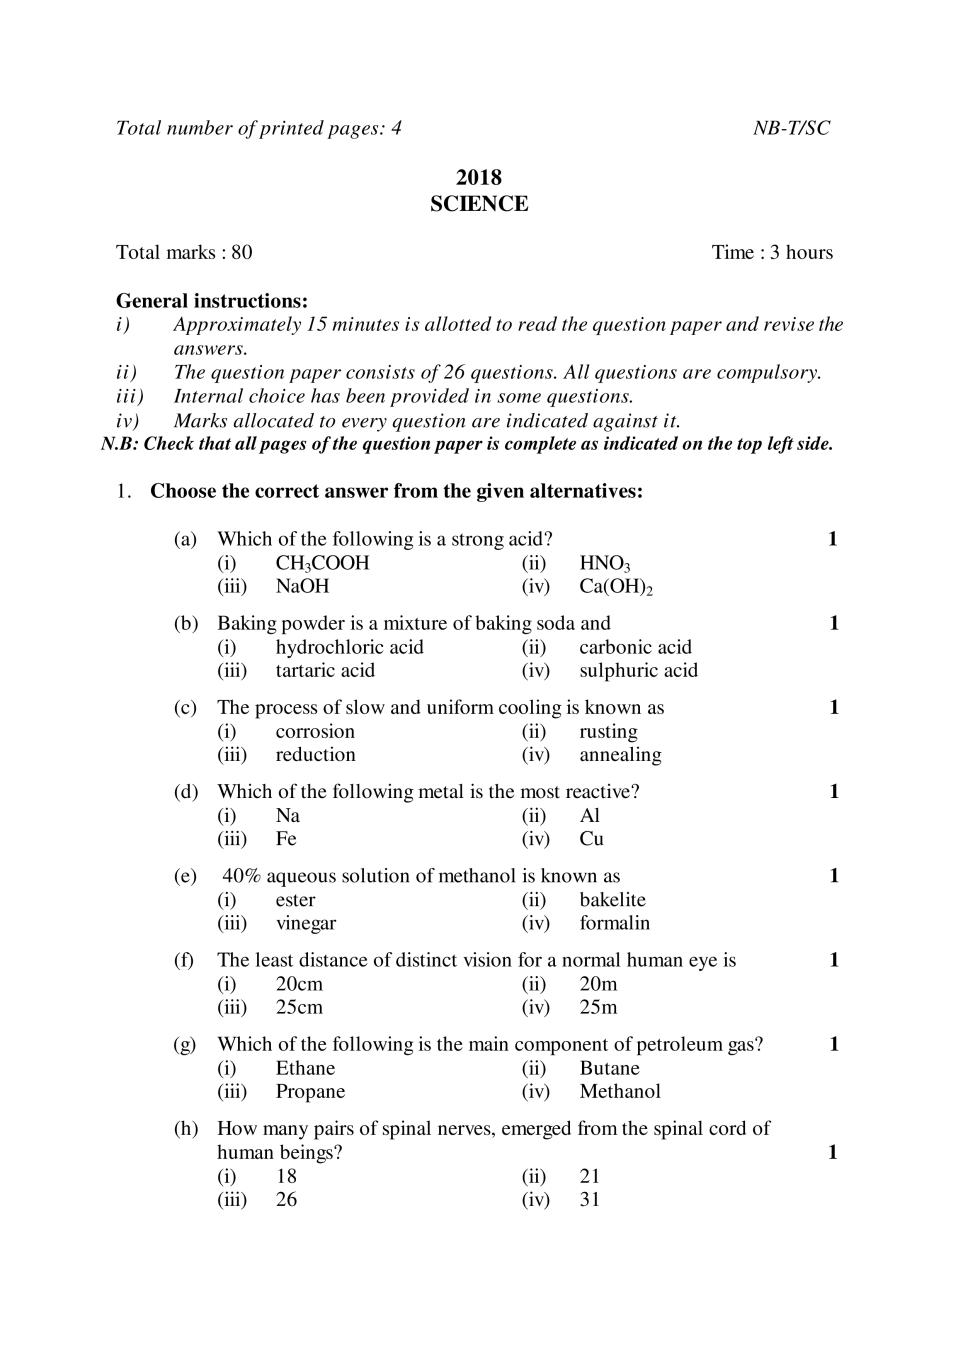 NBSE Class 10 Question Paper 2018 for Science - Page 1